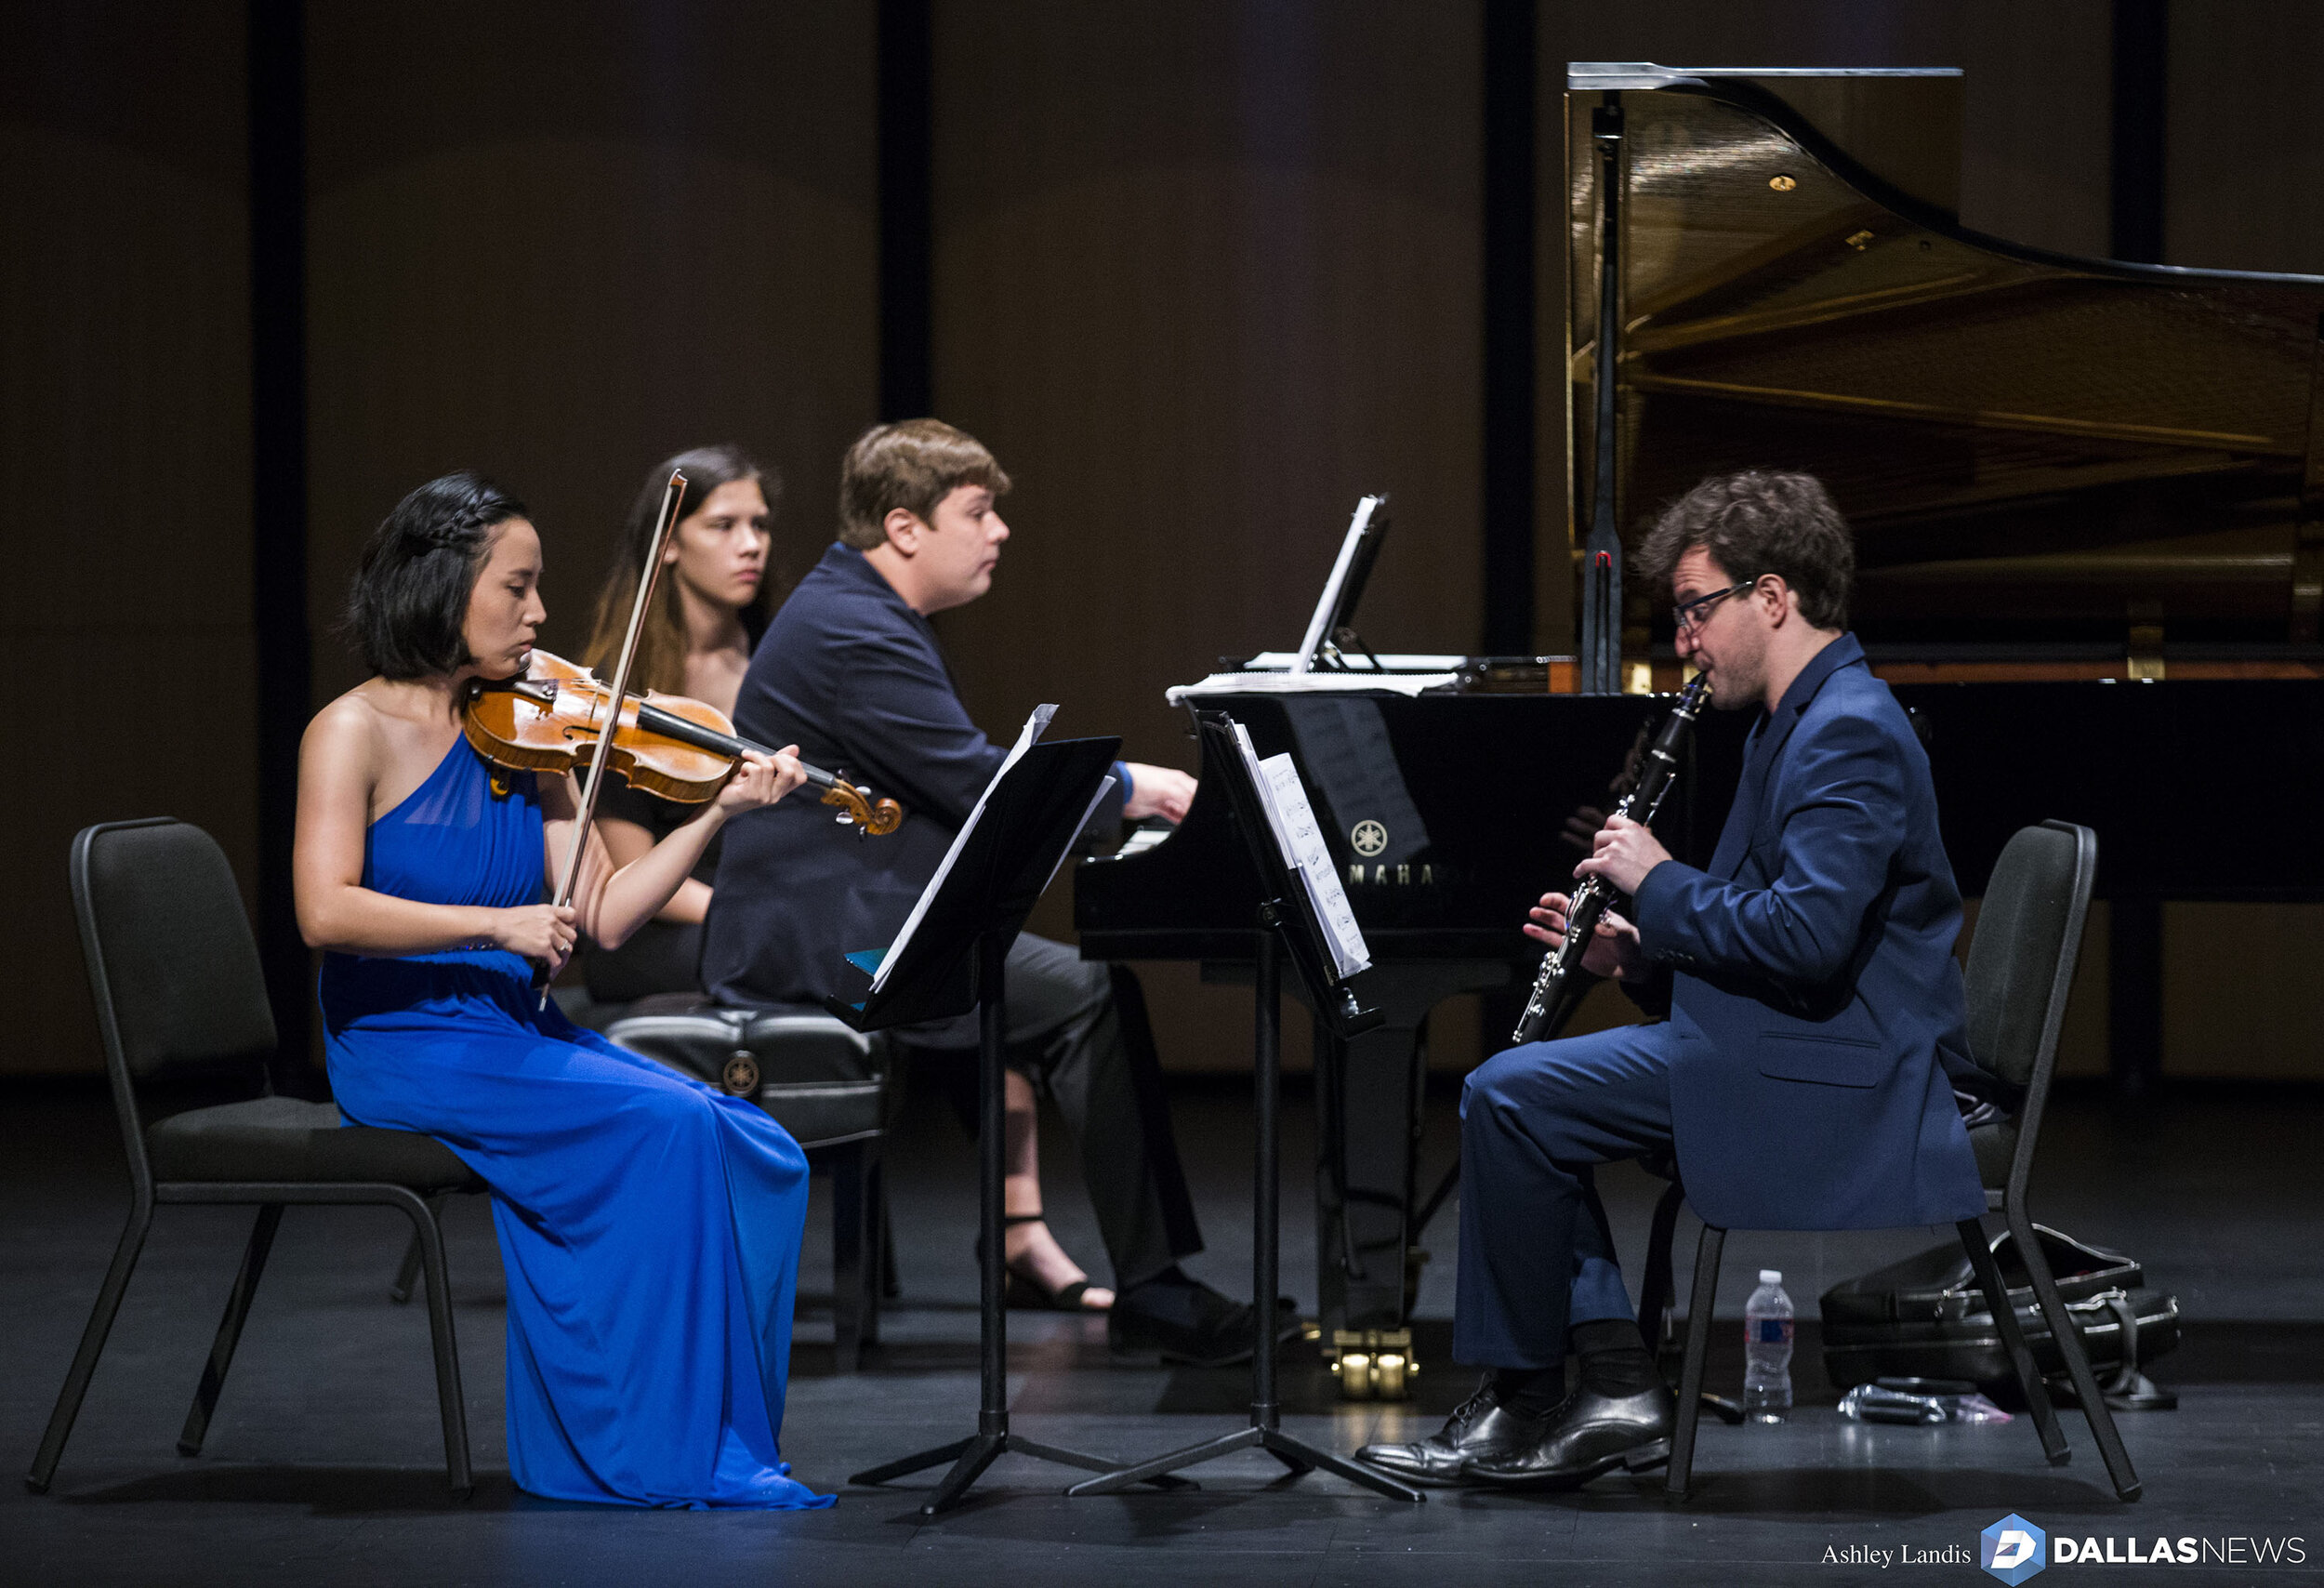  Violinist Grace Kang Wollett, pianist Mikhail Berestnev and clarinetist Danny Goldman rehearse before a Basically Beethoven Festival concert on Sunday, July 7, 2019 at Moody Performance Hall in Dallas. The Basically Beethoven Festival is a summer se